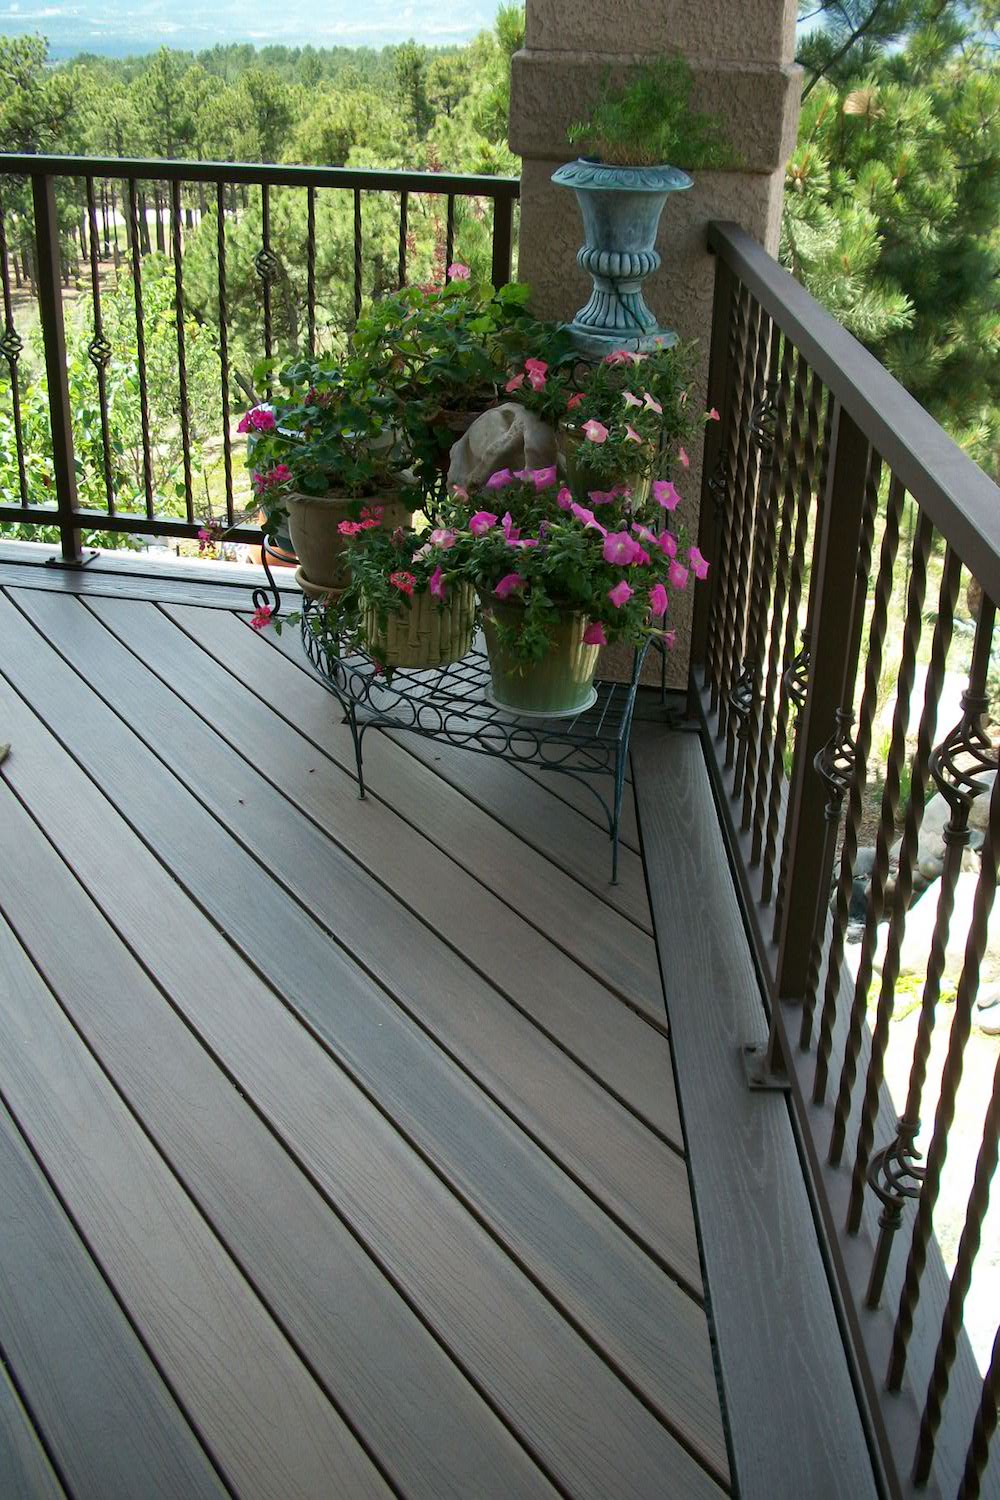 Close up picture of the double picture frame on the deck and the twisted balusters on the railing